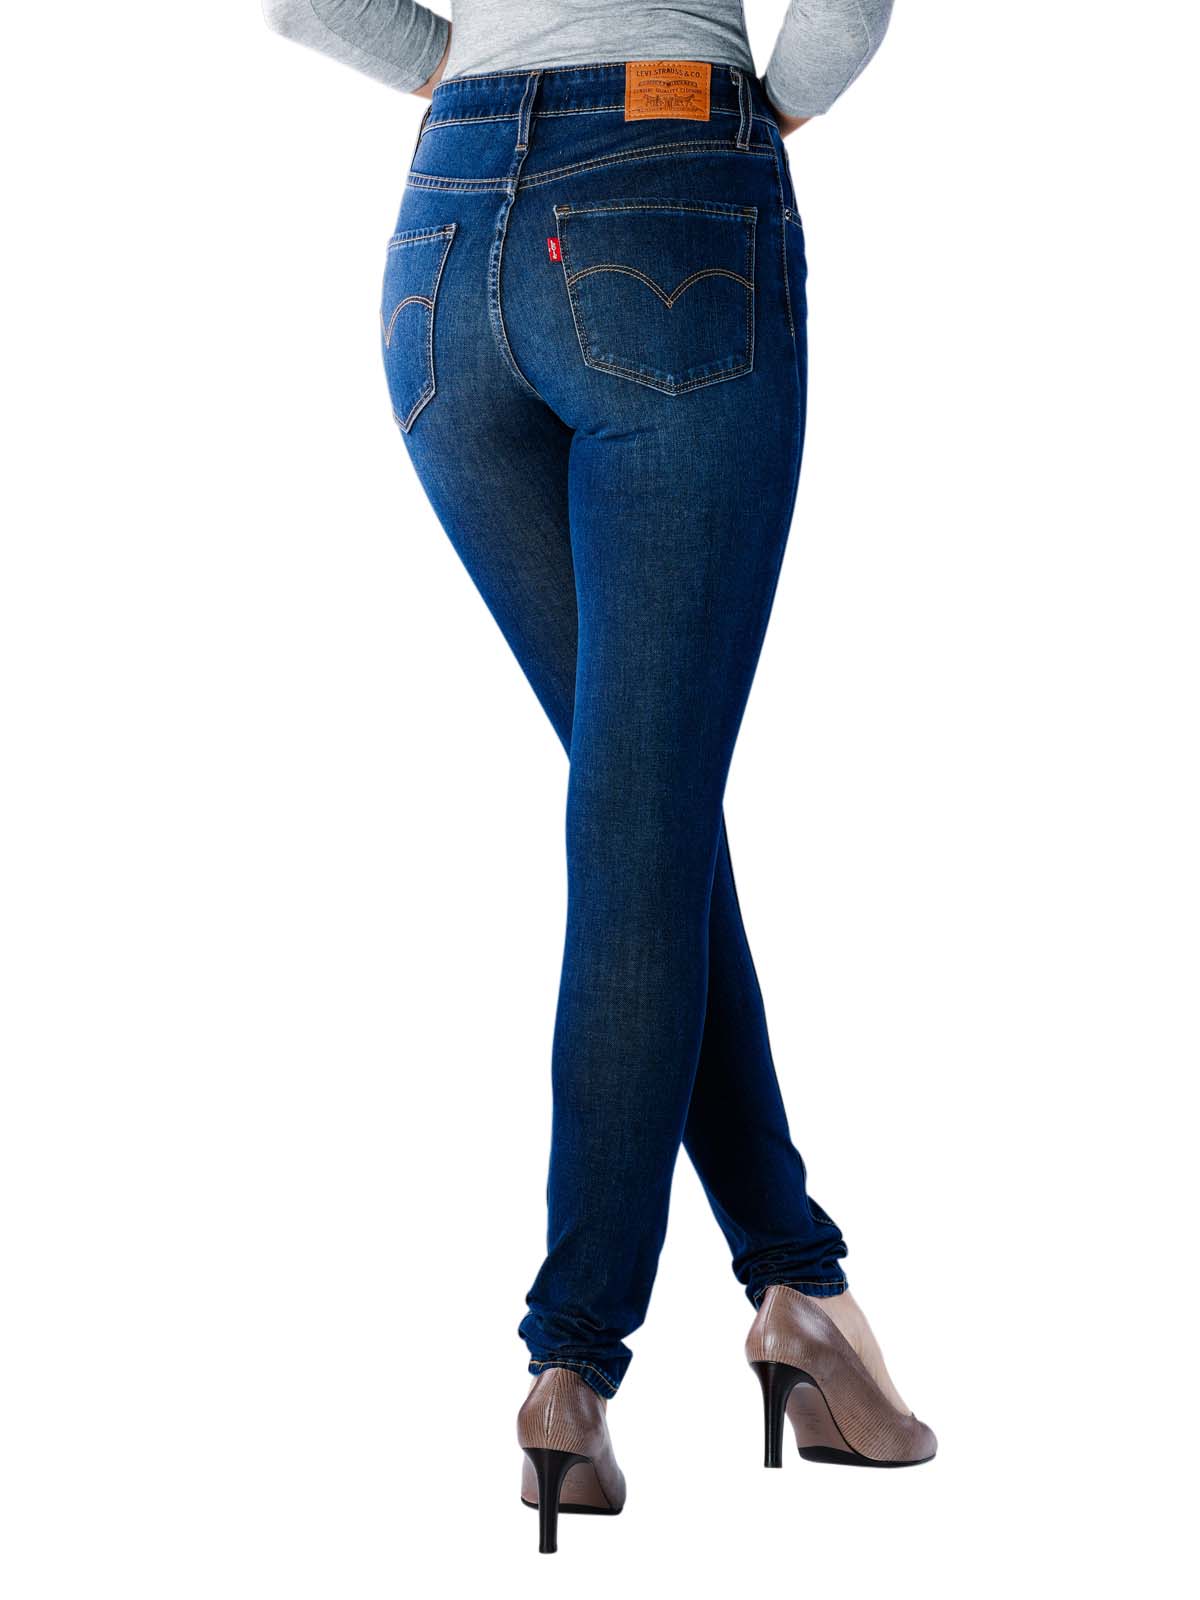 Levi's 721 High Rise Skinny Jeans up for grabs Levi's Women's Jeans | Free  Shipping on  - SIMPLY LOOK GOOD